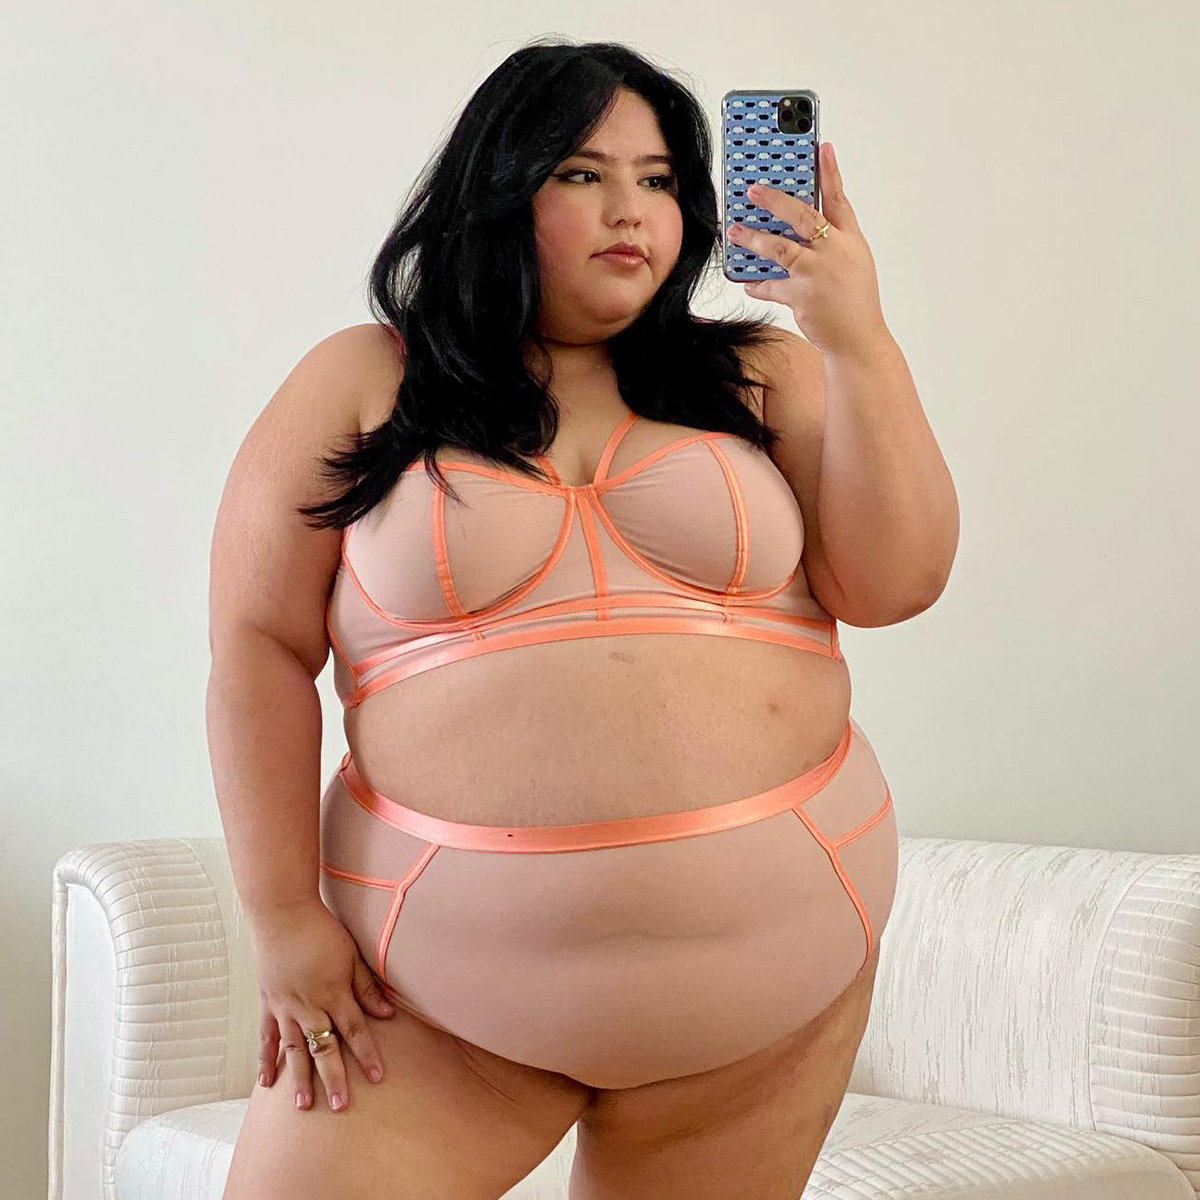 6 plus-size lingerie brands that are showing curvy girls some serious love